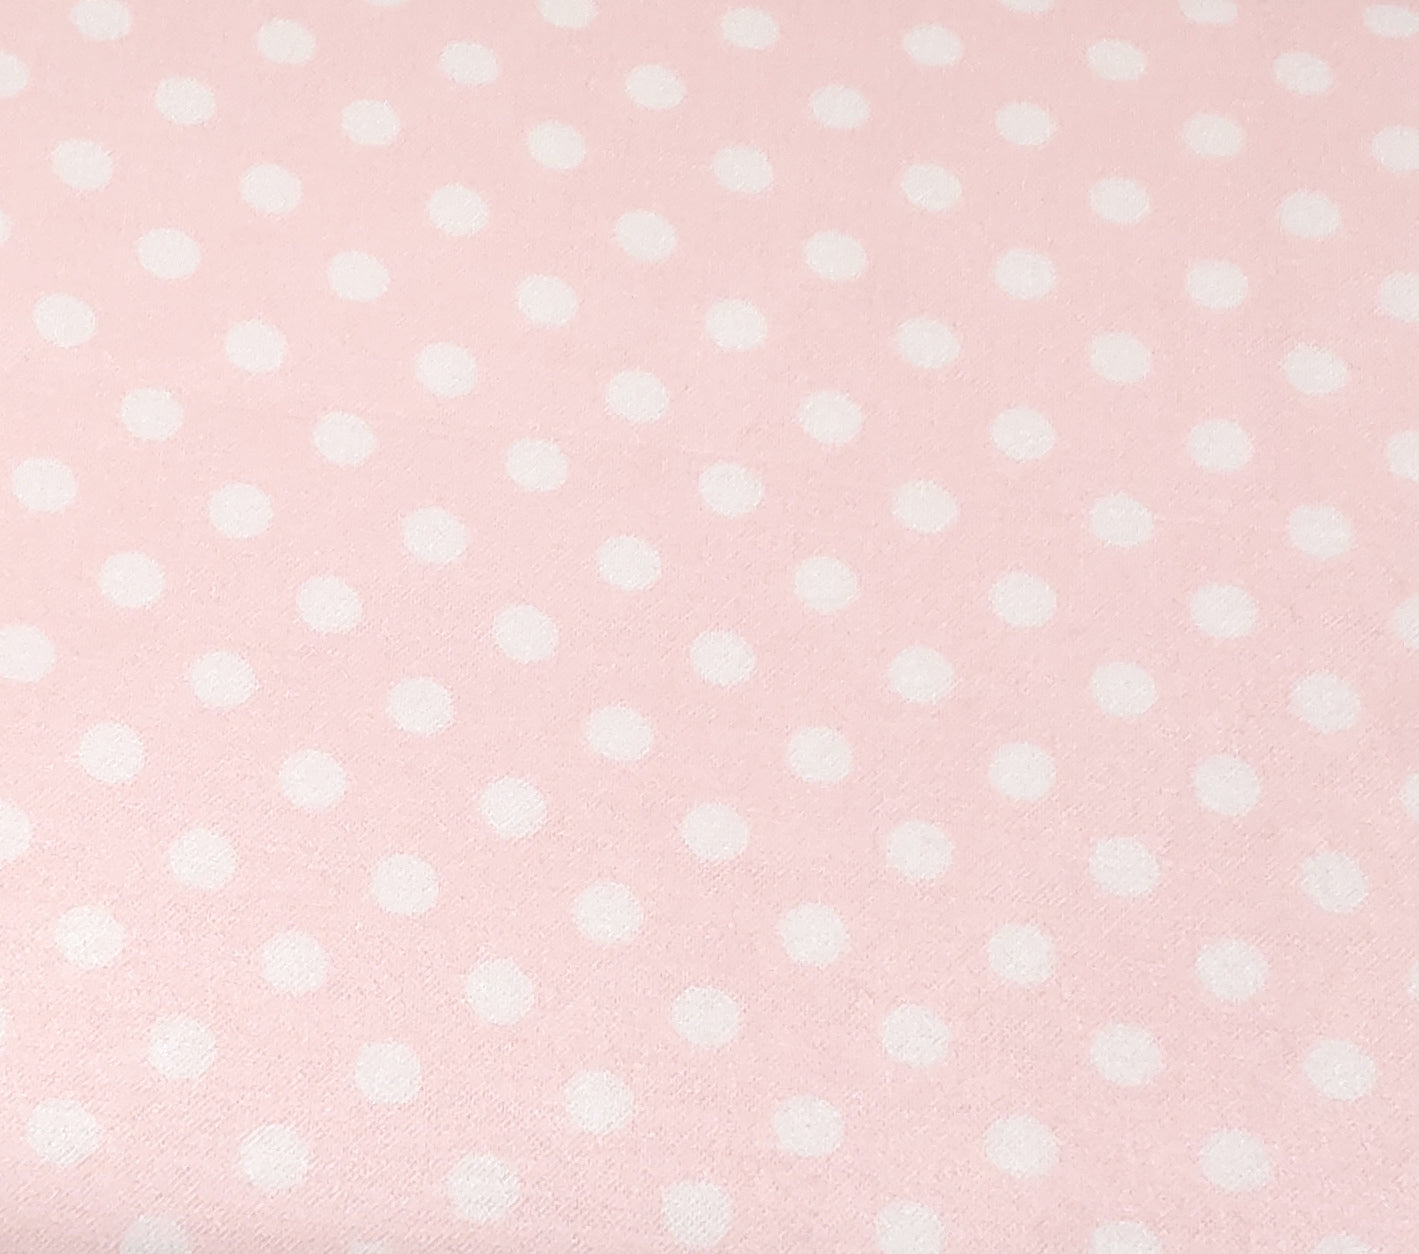 White Polka Dots on Pink ♥ Bamboo Flannel